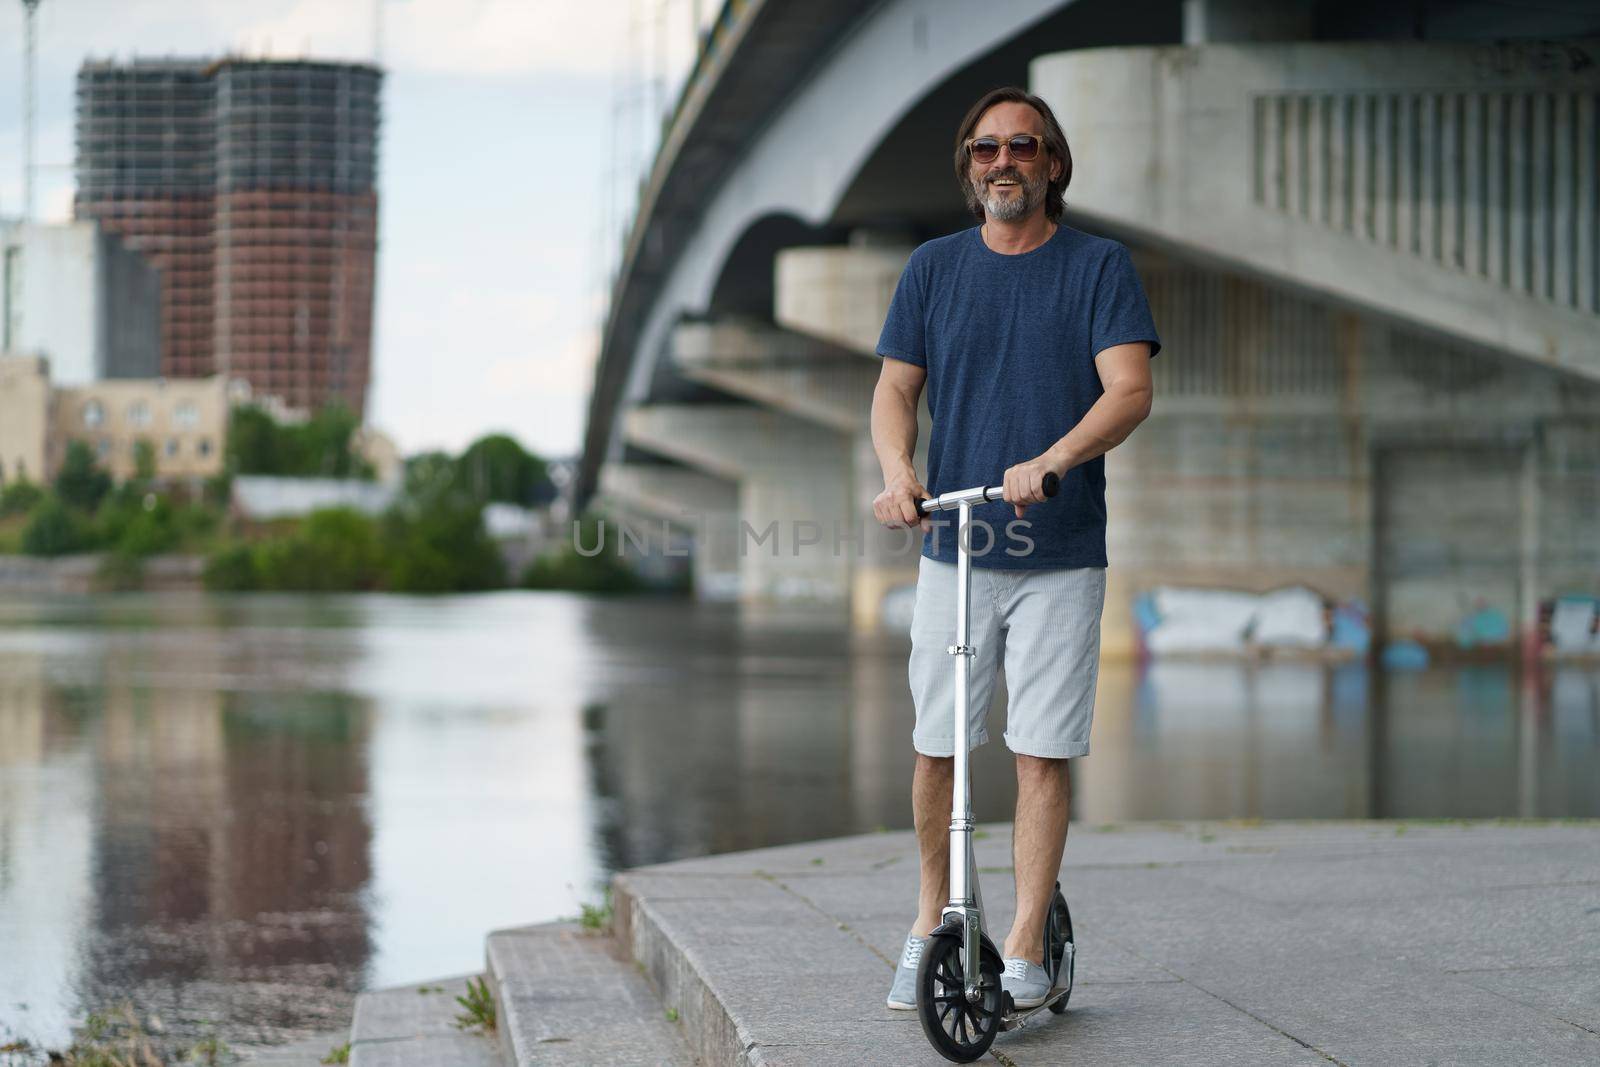 Business on the go. Riding scooter handsome stylish middle aged man with grey beard stand under town bridge over river with urban city on background after work outdoors. Travel, lifestyle concept.